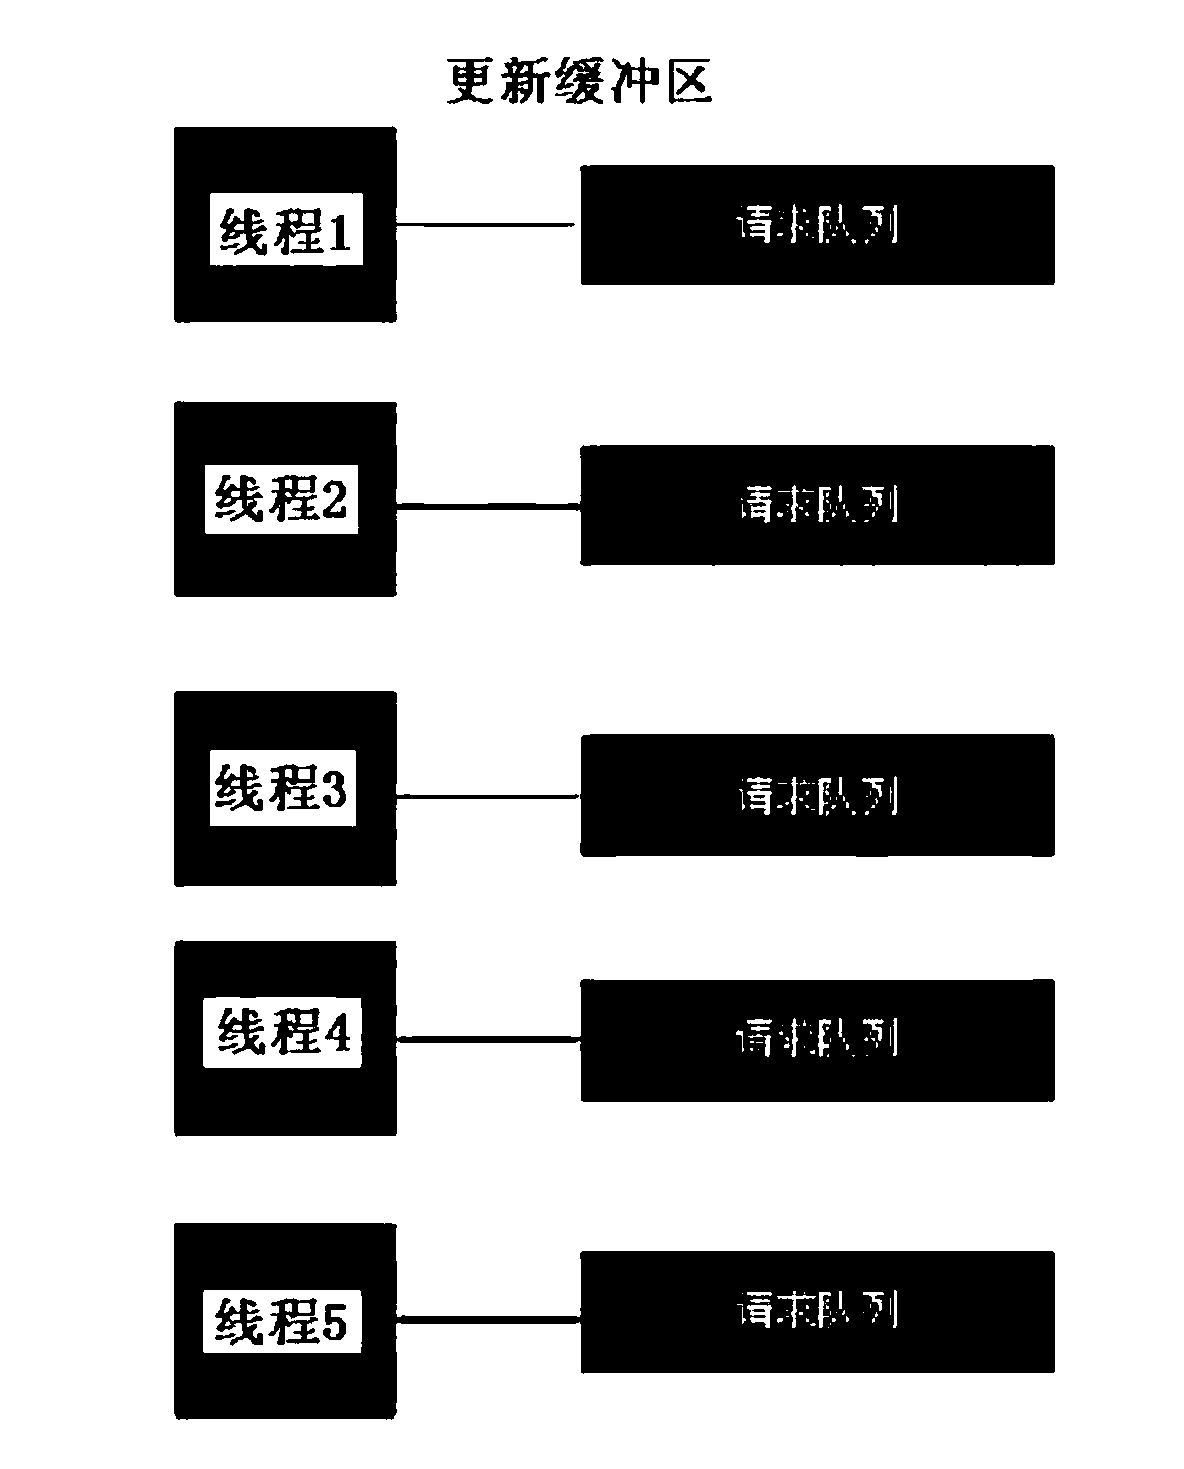 Method for asynchronous updating based on buffer area